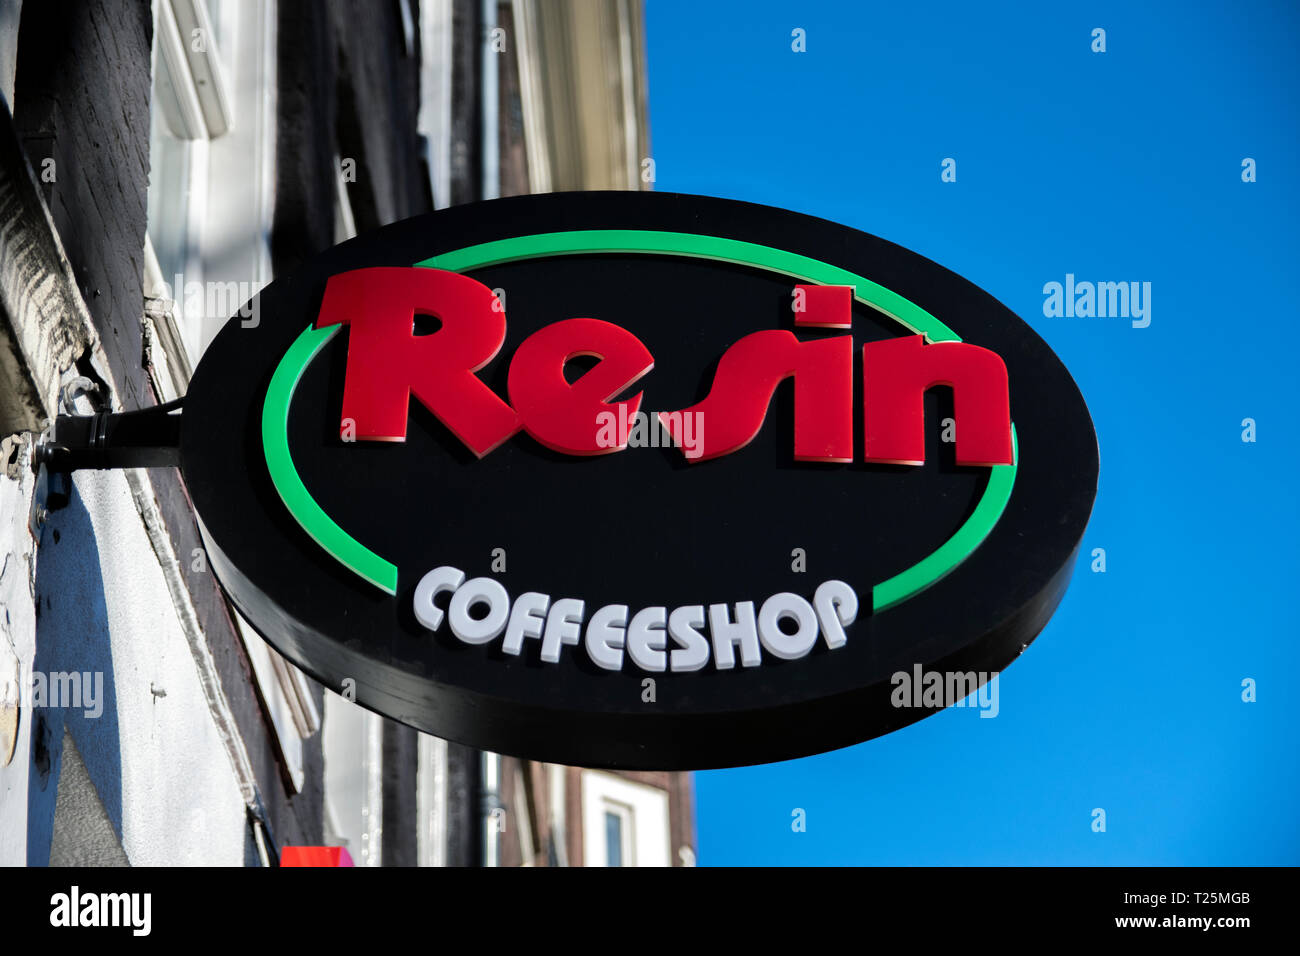 Coffeeshop Resin At Amsterdam The Netherlands 2019 Stock Photo - Alamy